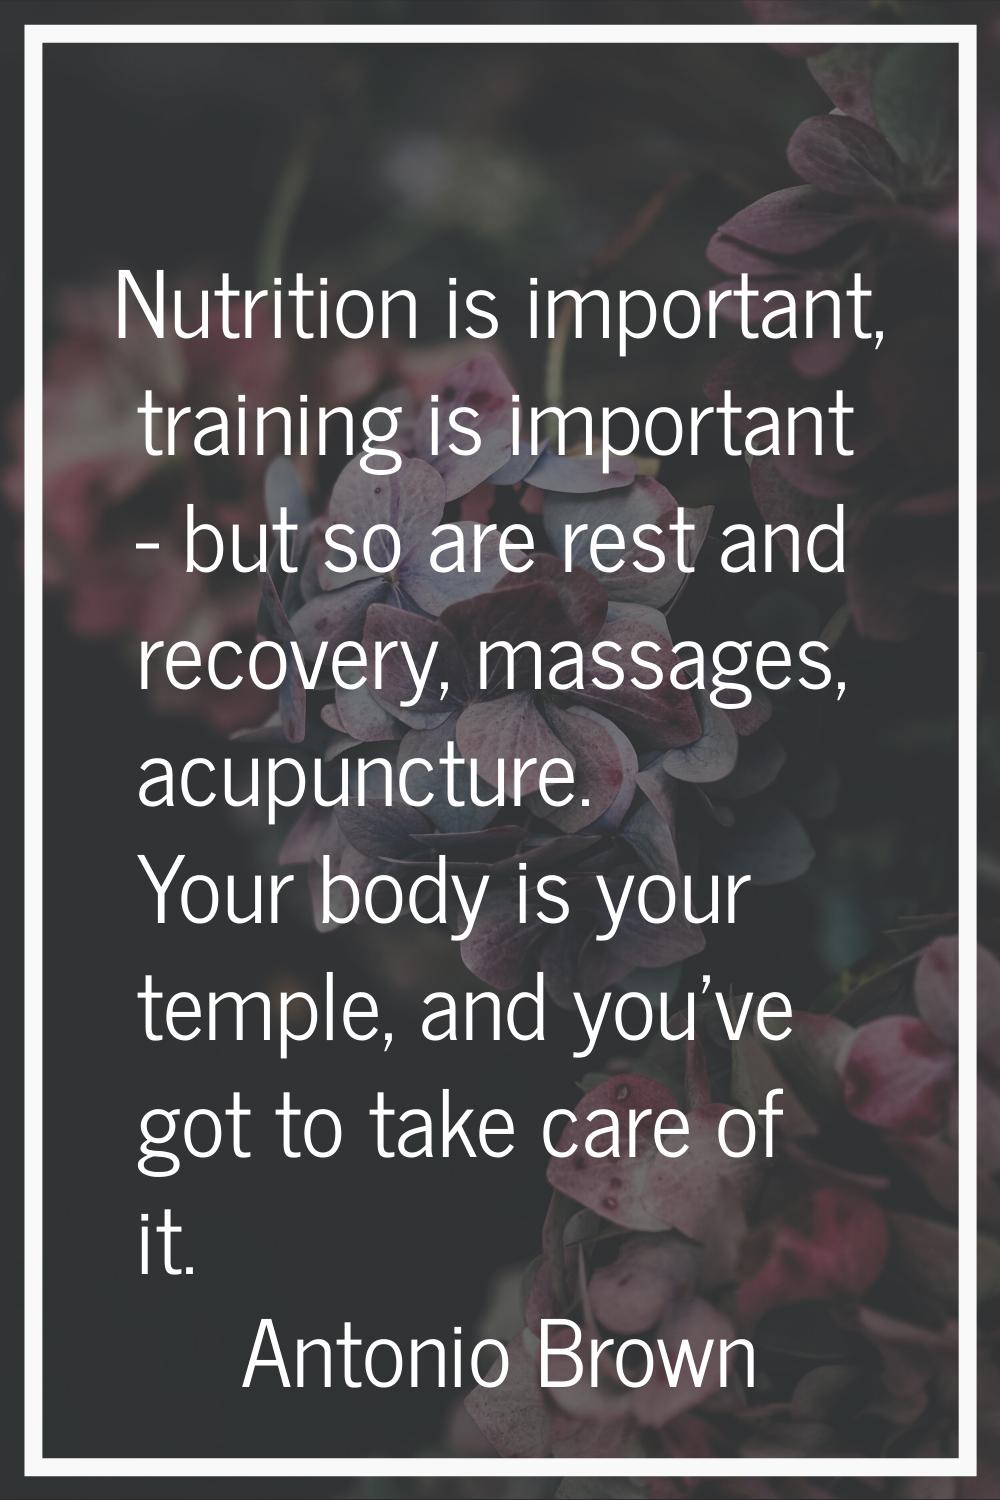 Nutrition is important, training is important - but so are rest and recovery, massages, acupuncture